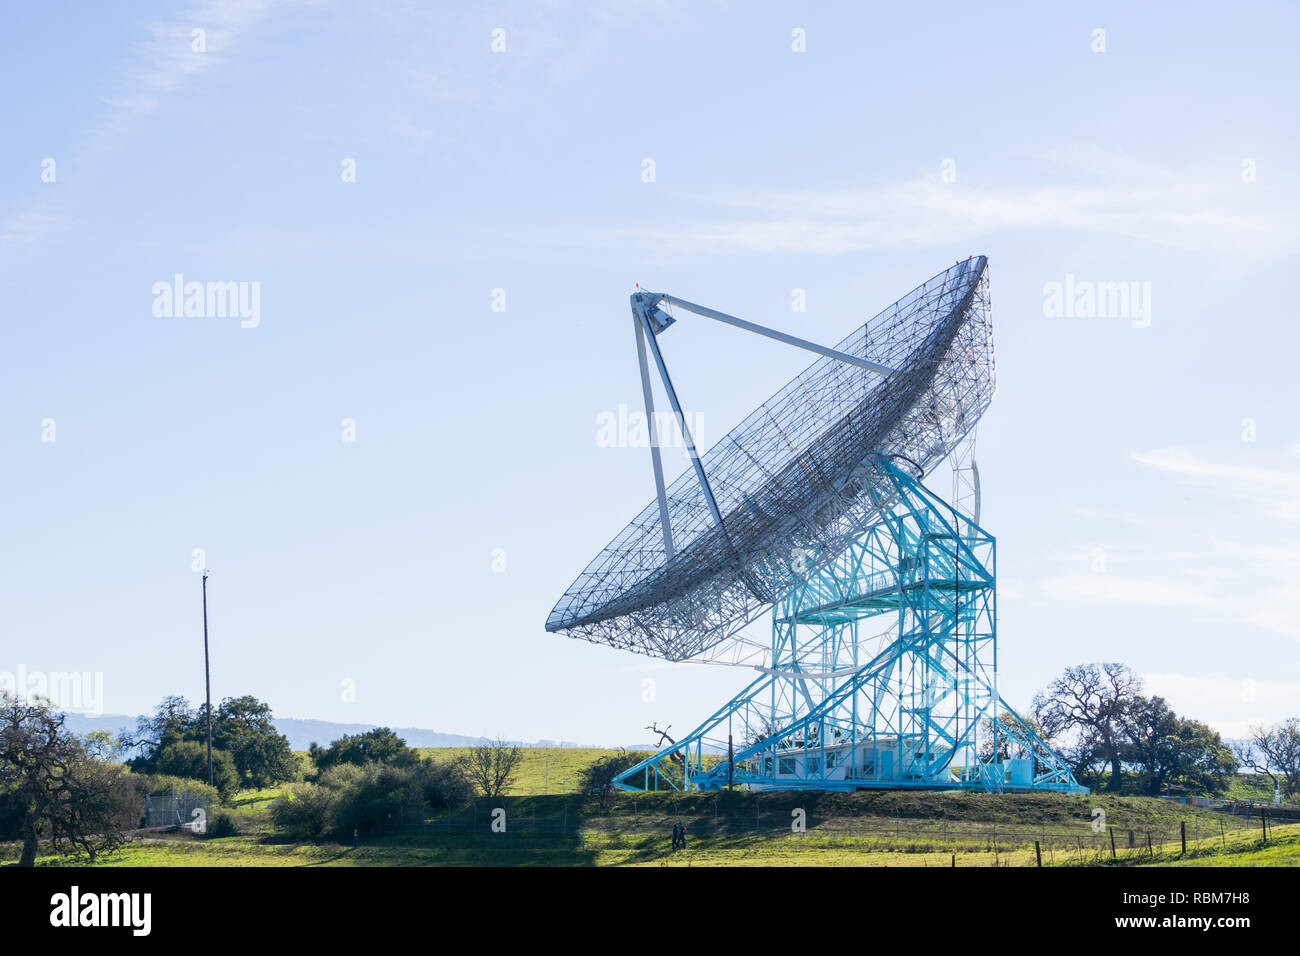 Stanford Dish as seen from the trail, Palo Alto, California Stock Photo